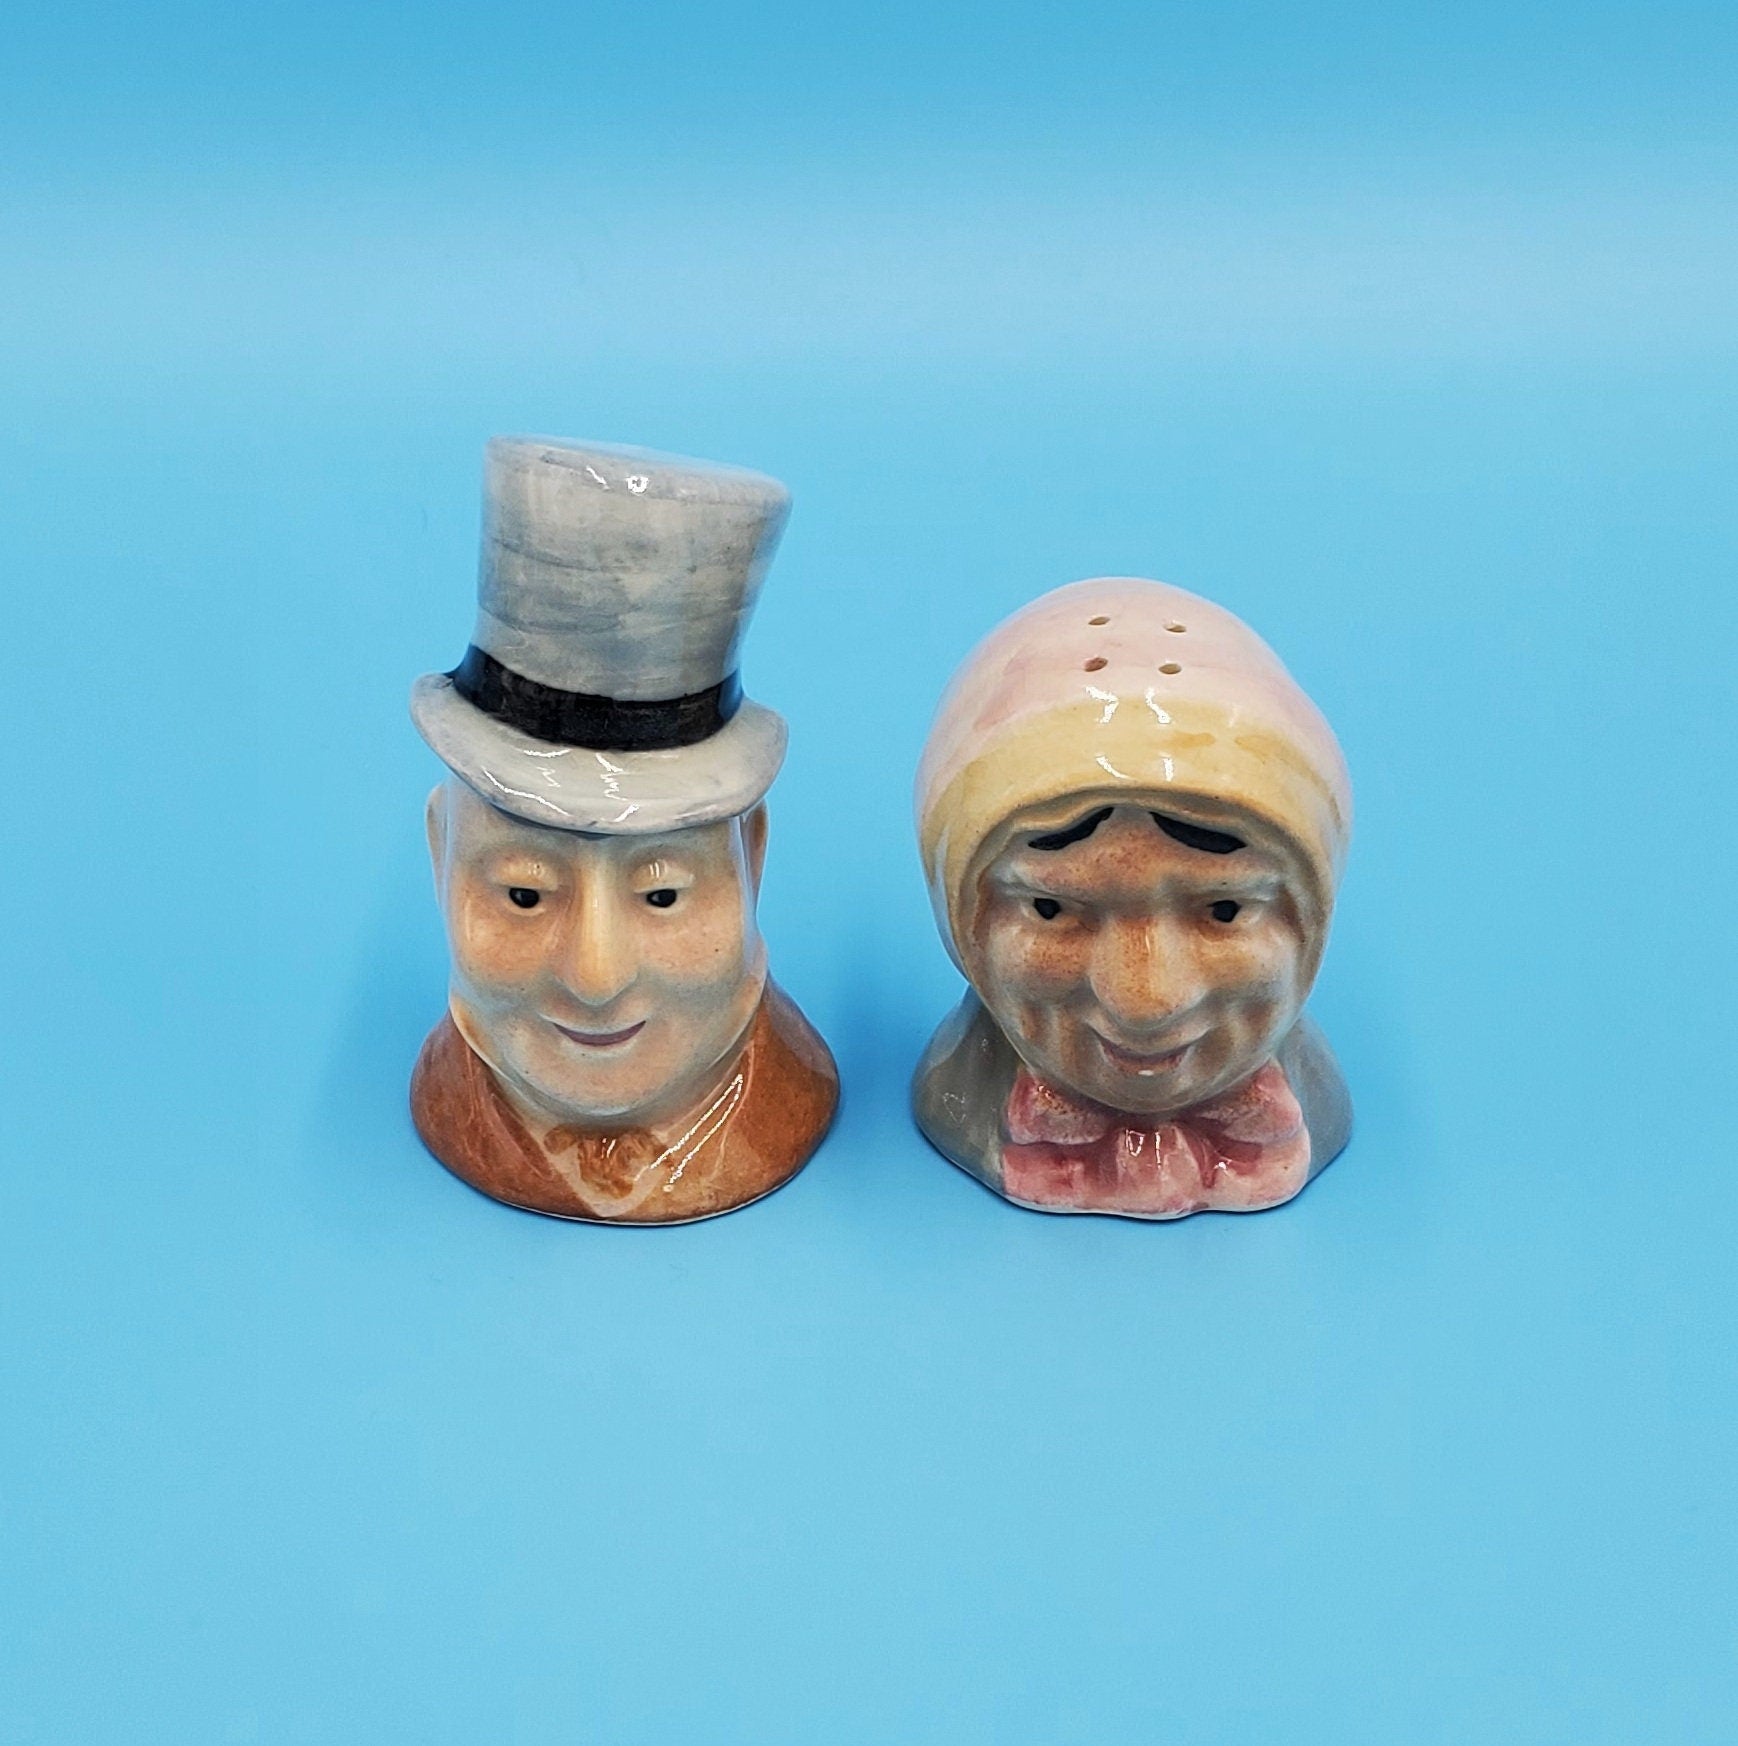 Collecting Vintage Salt and Pepper Shakers